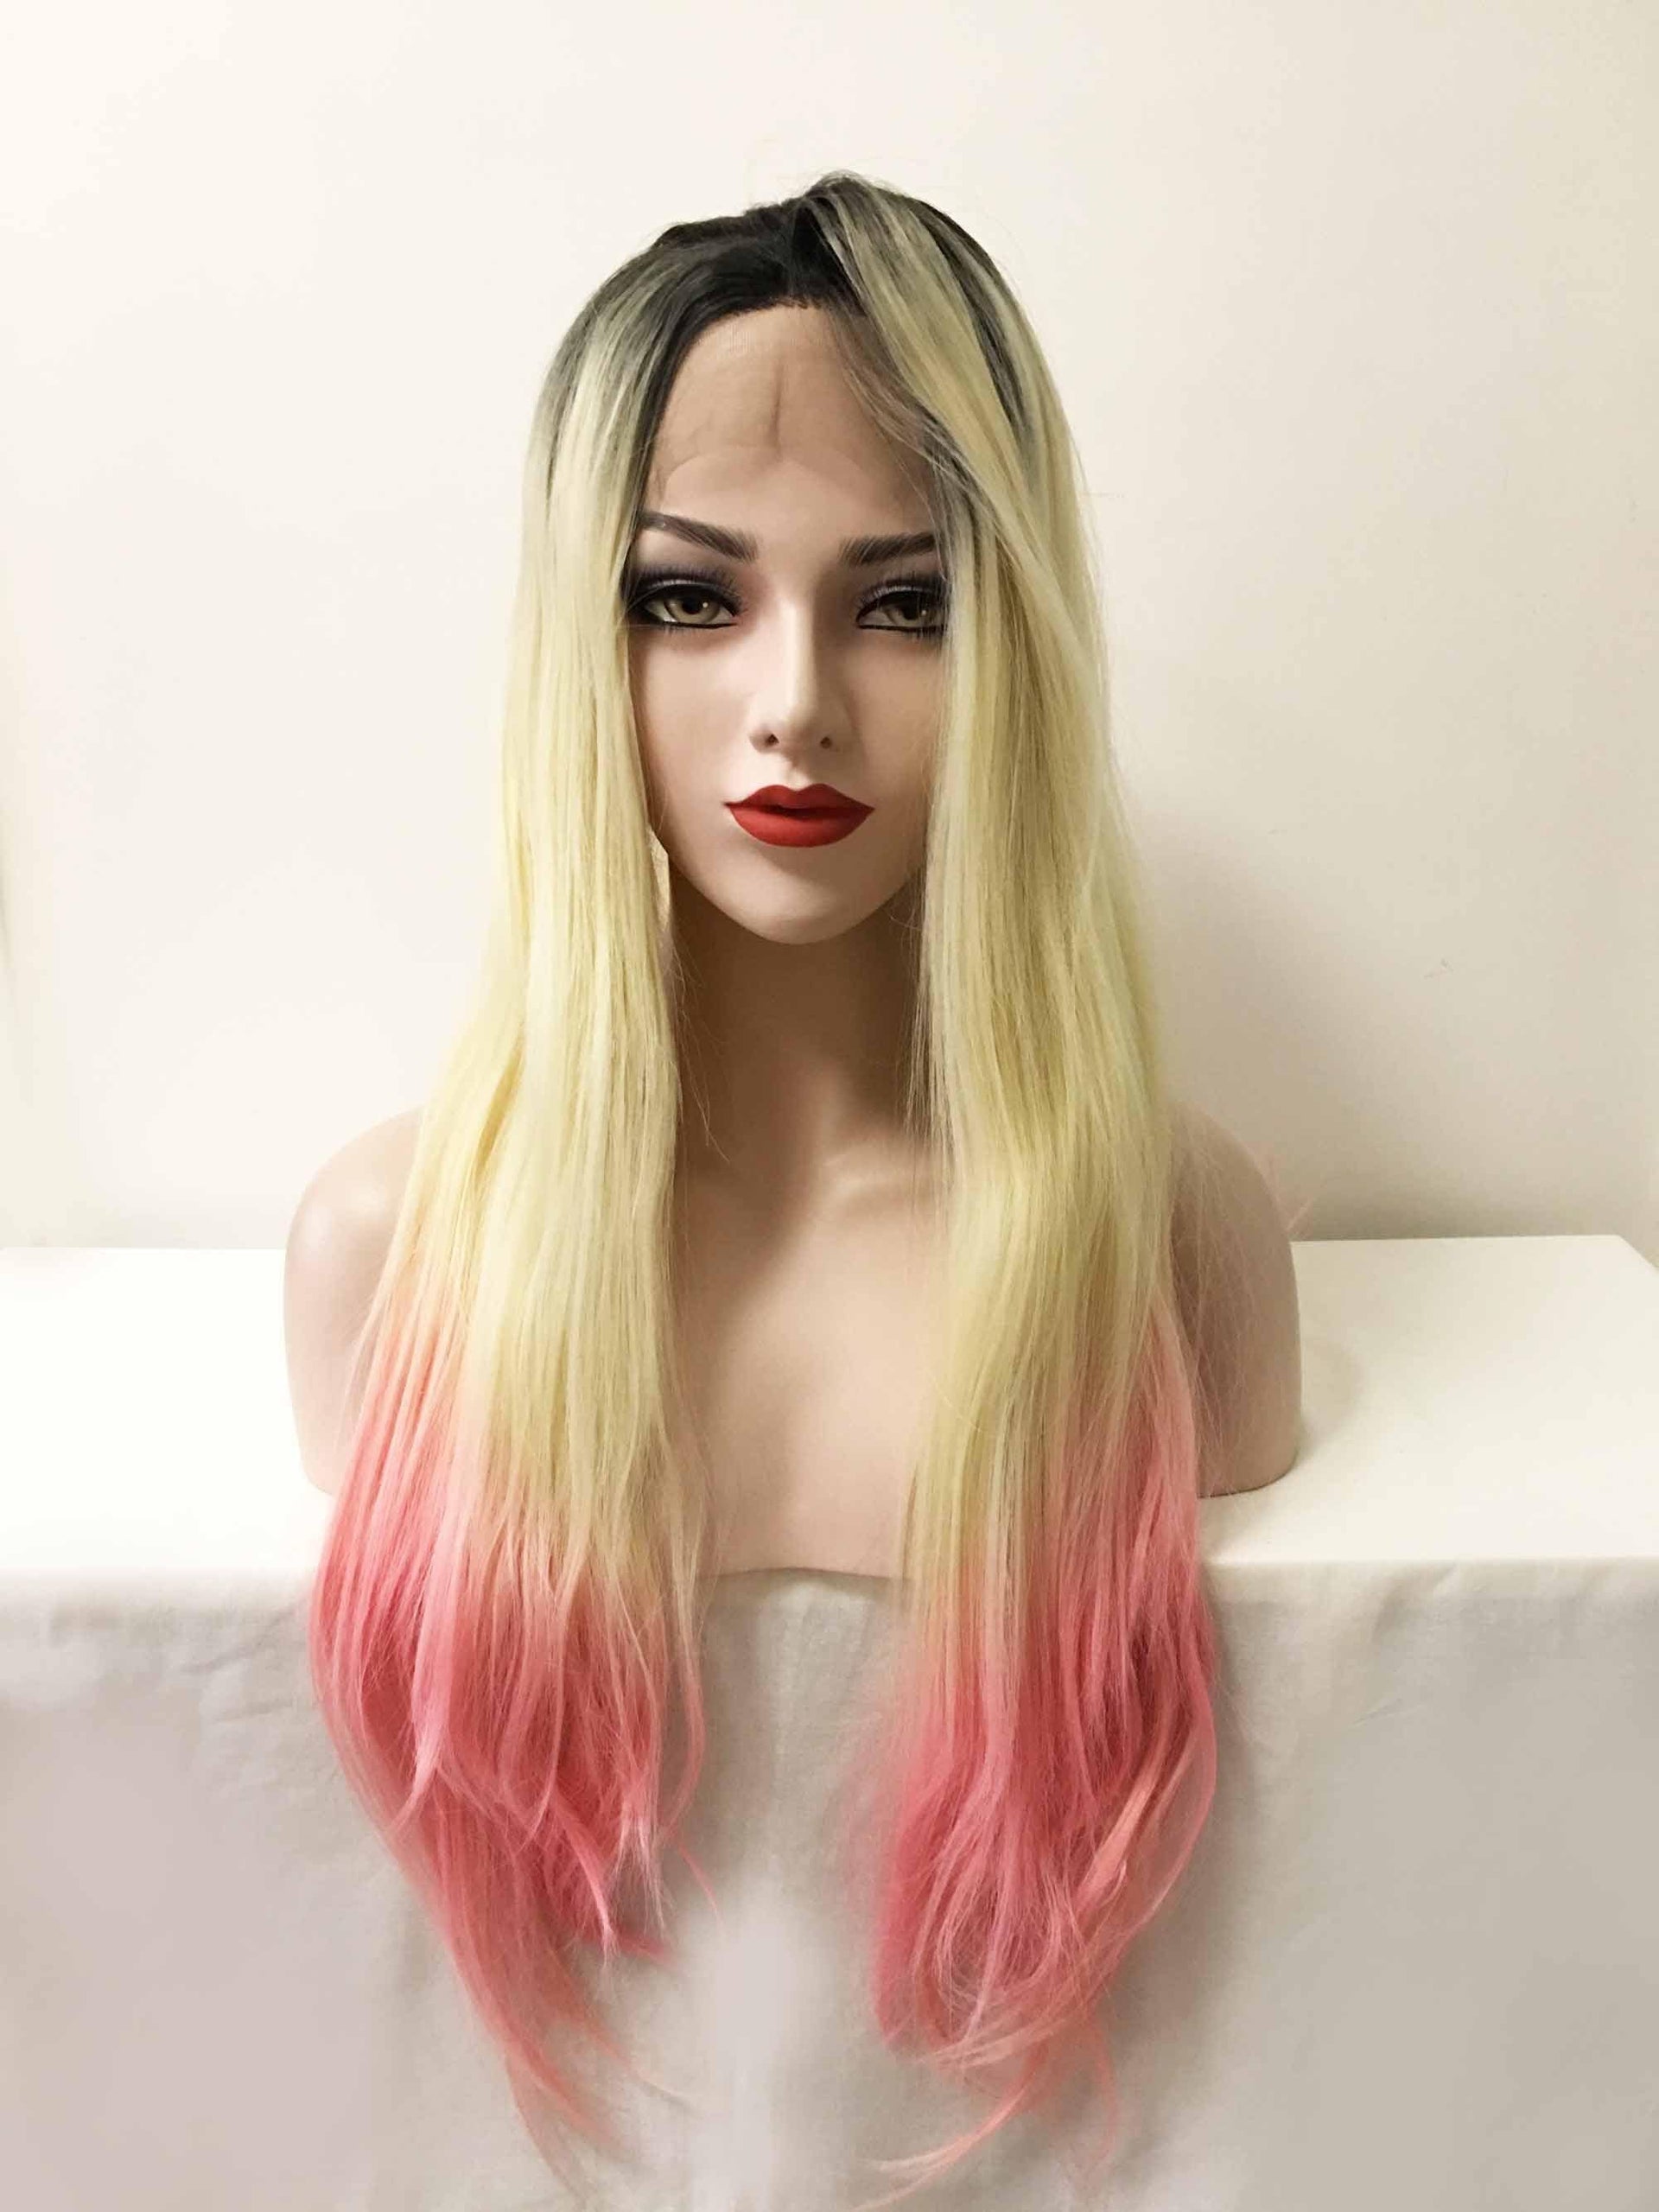 nevermindyrhead Women Blonde Ombre Pink Dark Root Lace Front Long Straight Middle Part Wig